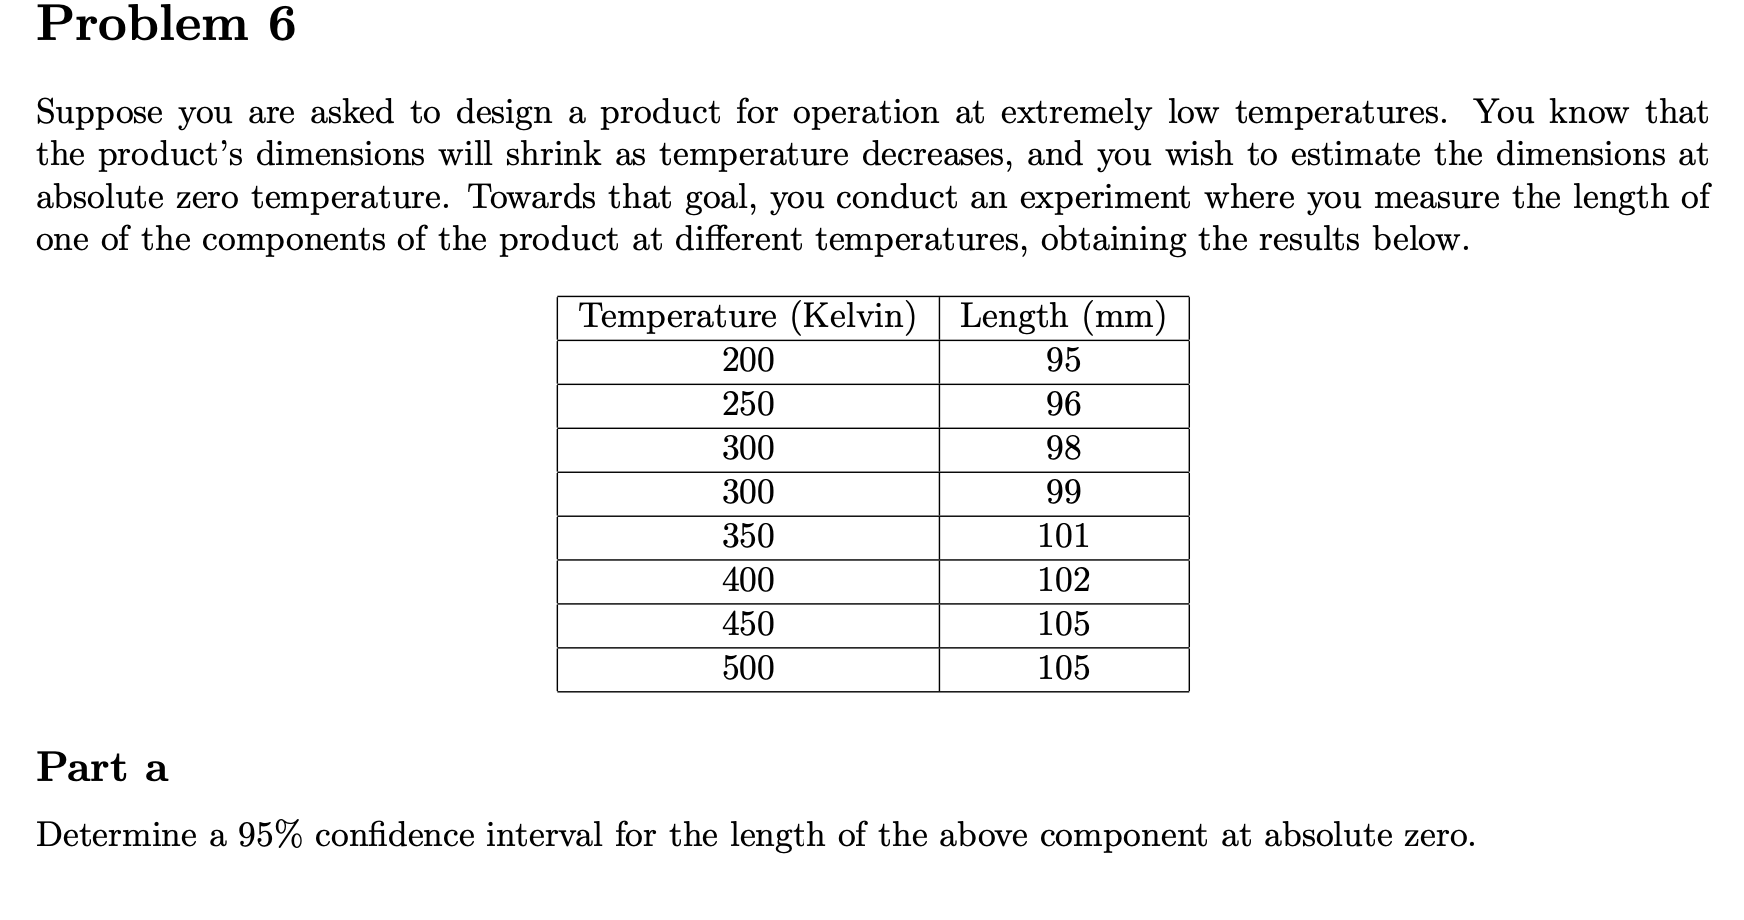 Suppose you are asked to design a product for operation at extremely low temperatures. You know that
the product's dimensions will shrink as temperature decreases, and you wish to estimate the dimensions at
absolute zero temperature. Towards that goal, you conduct an experiment where you measure the length of
one of the components of the product at different temperatures, obtaining the results below.
Temperature (Kelvin) | Length (mm)
200
95
250
96
300
98
300
99
350
101
400
102
450
105
500
105
Part a
Determine a 95% confidence interval for the length of the above component at absolute zero.
